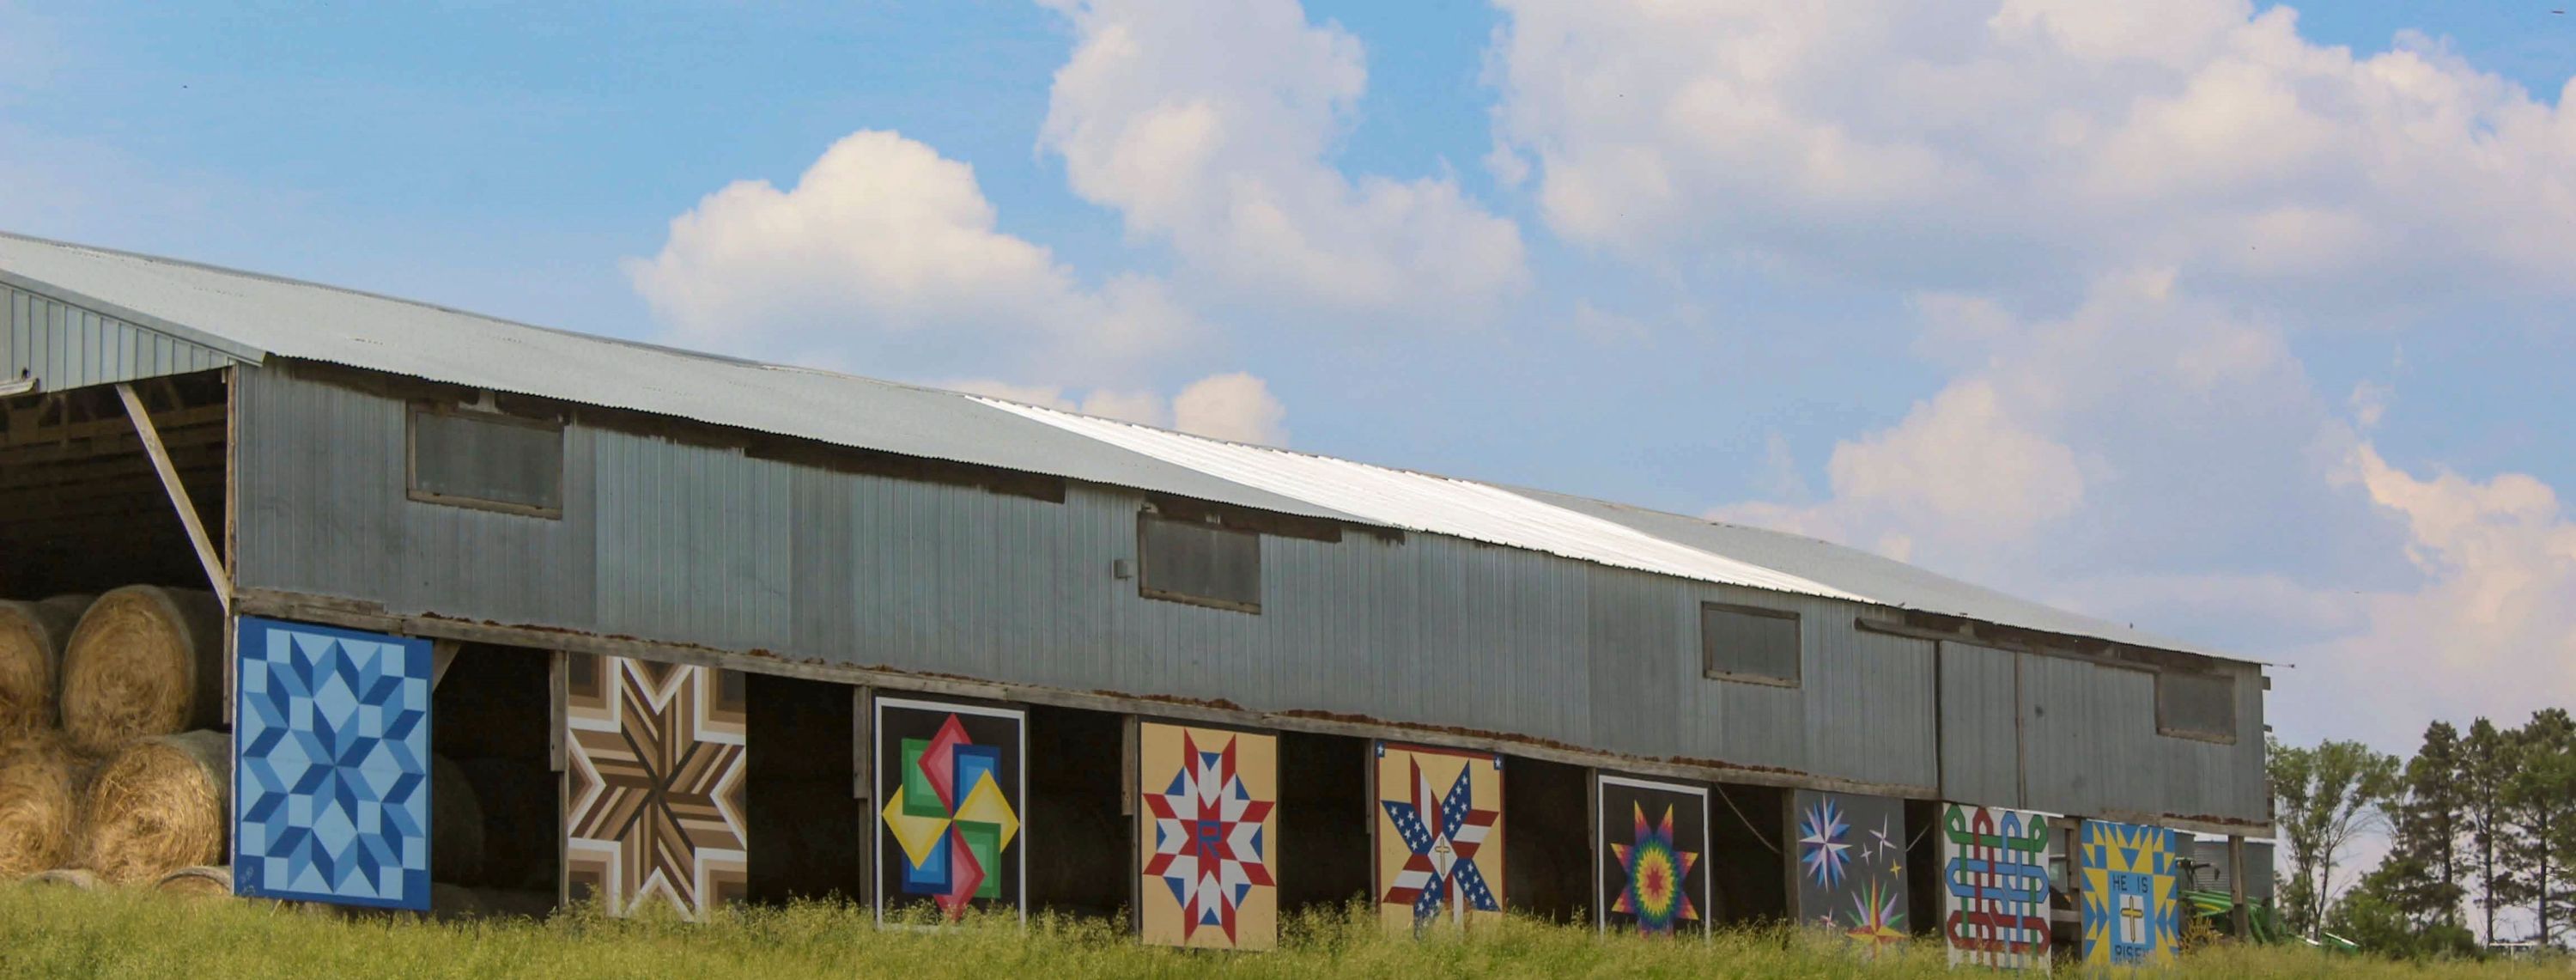 quilt icons on barn